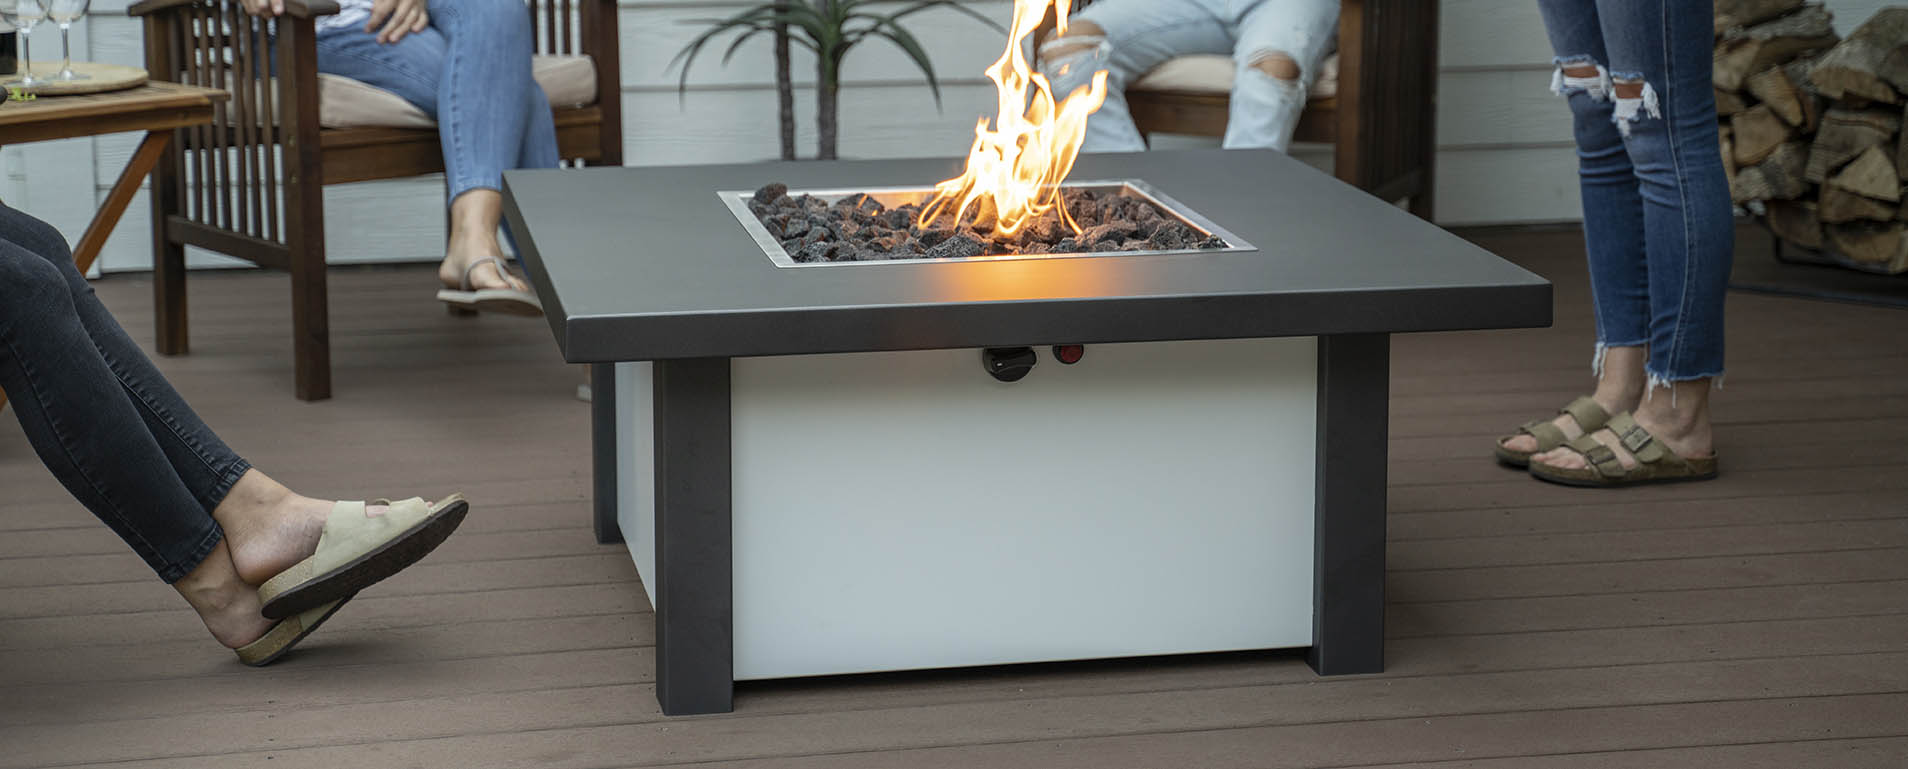 Fire pit tables allow for customizations of finishes.